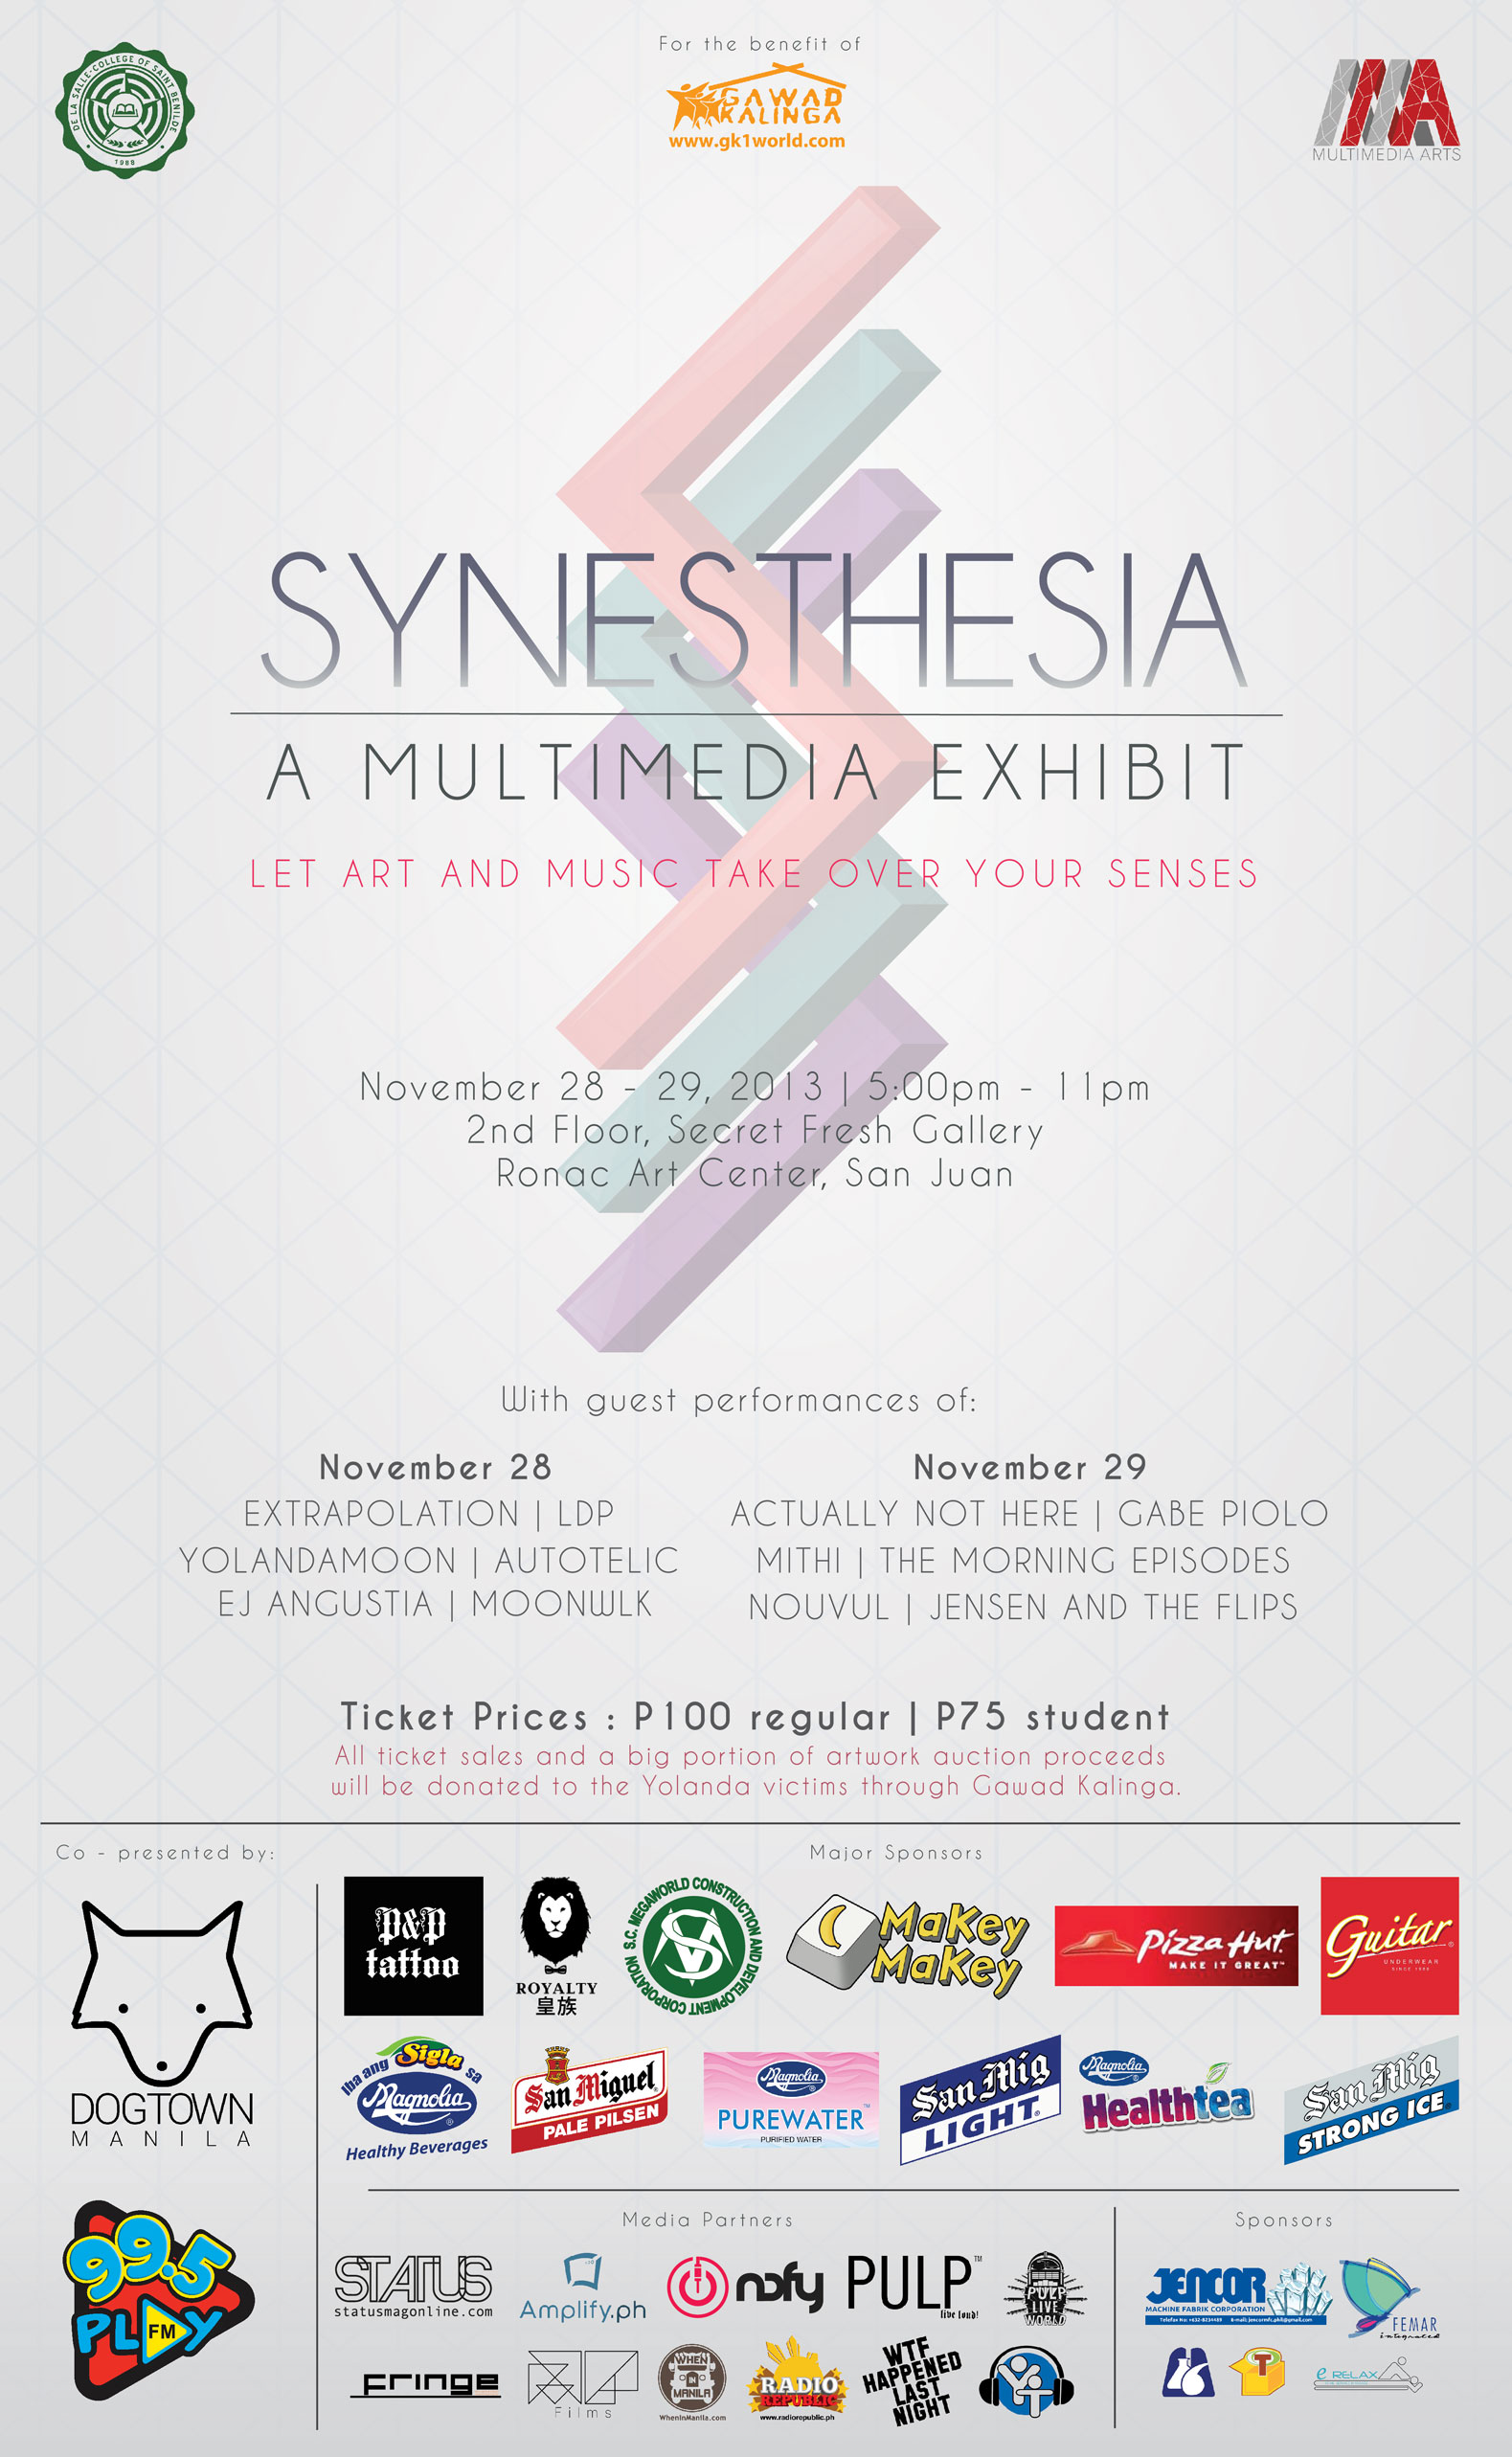 Synesthesia: The New Breed of Multimedia Arts Exhibit